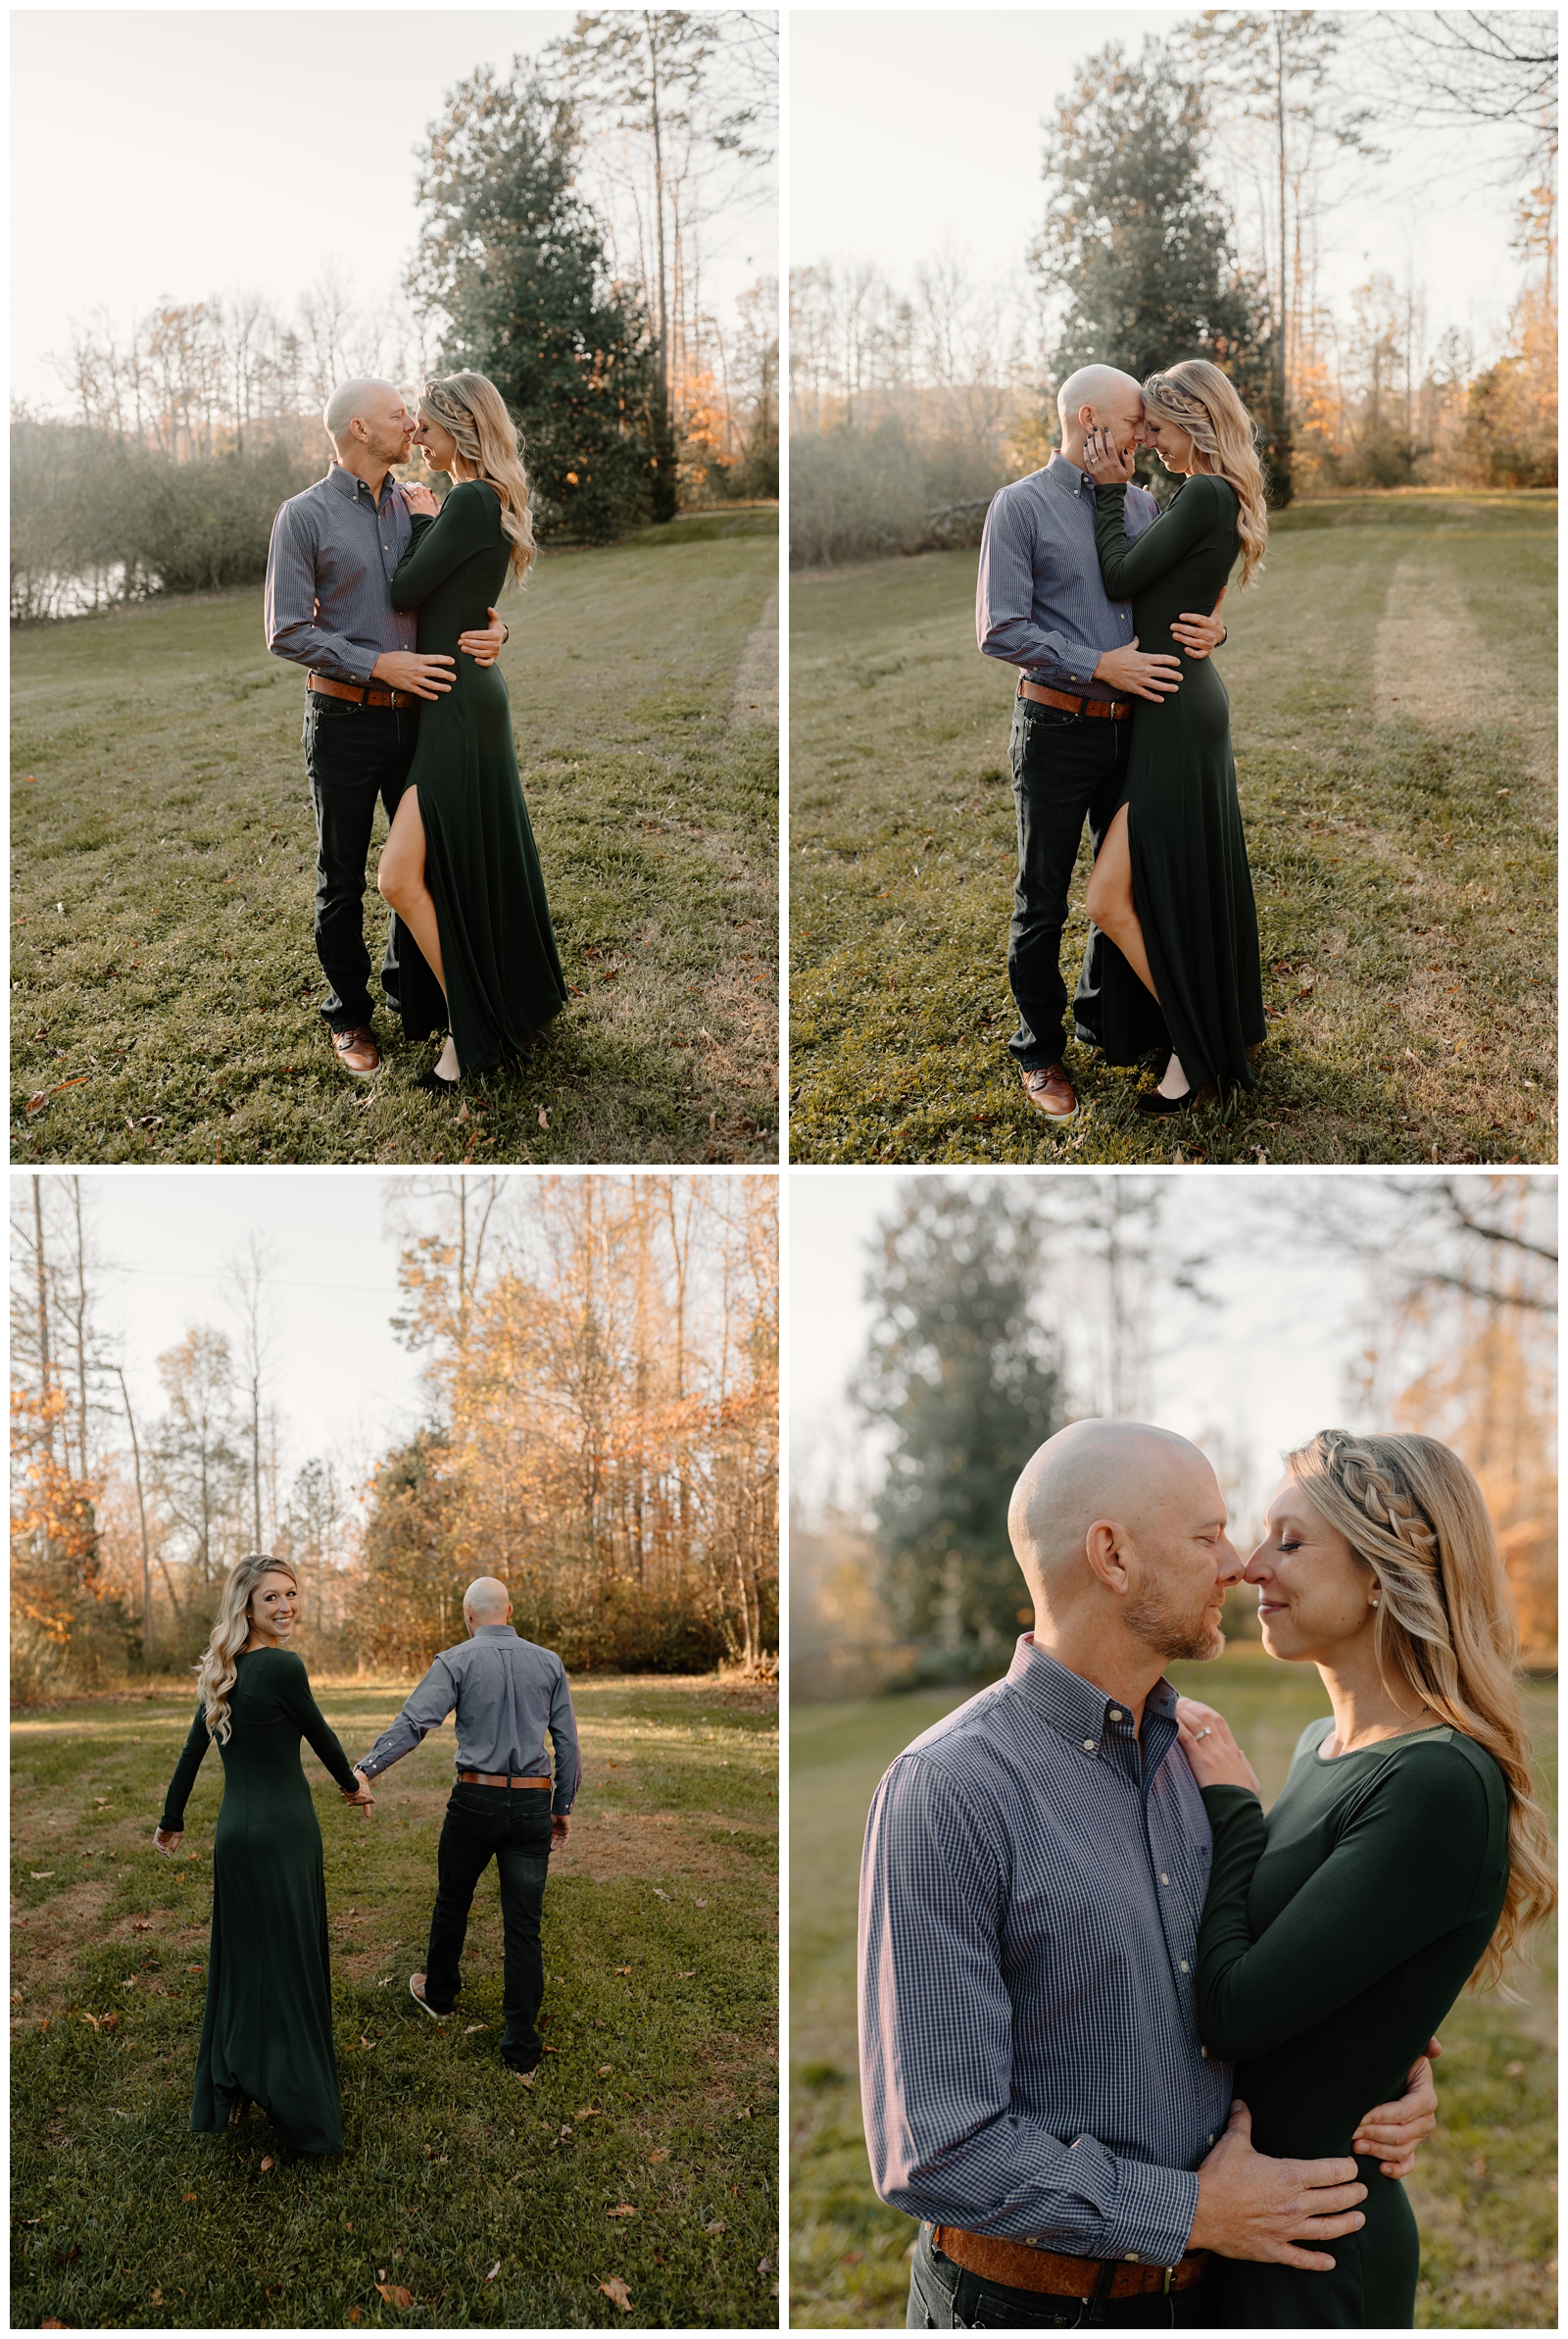 Romantic fall engagement session in Greensboro, NC by North Carolina photographer